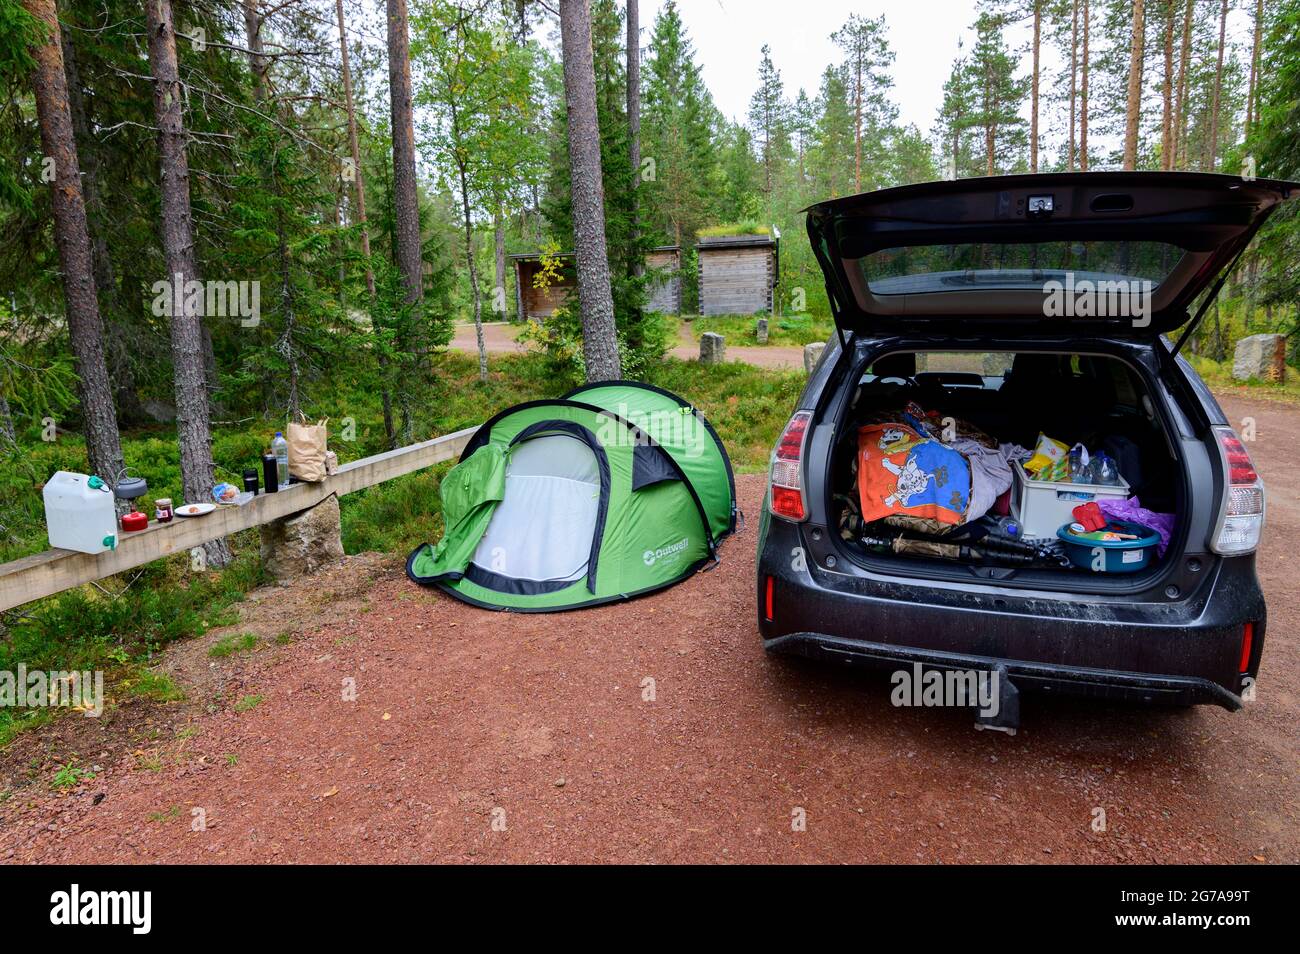 Tourist pop up tent and a car on a parking place in Hamra National Park, Sweden Stock Photo